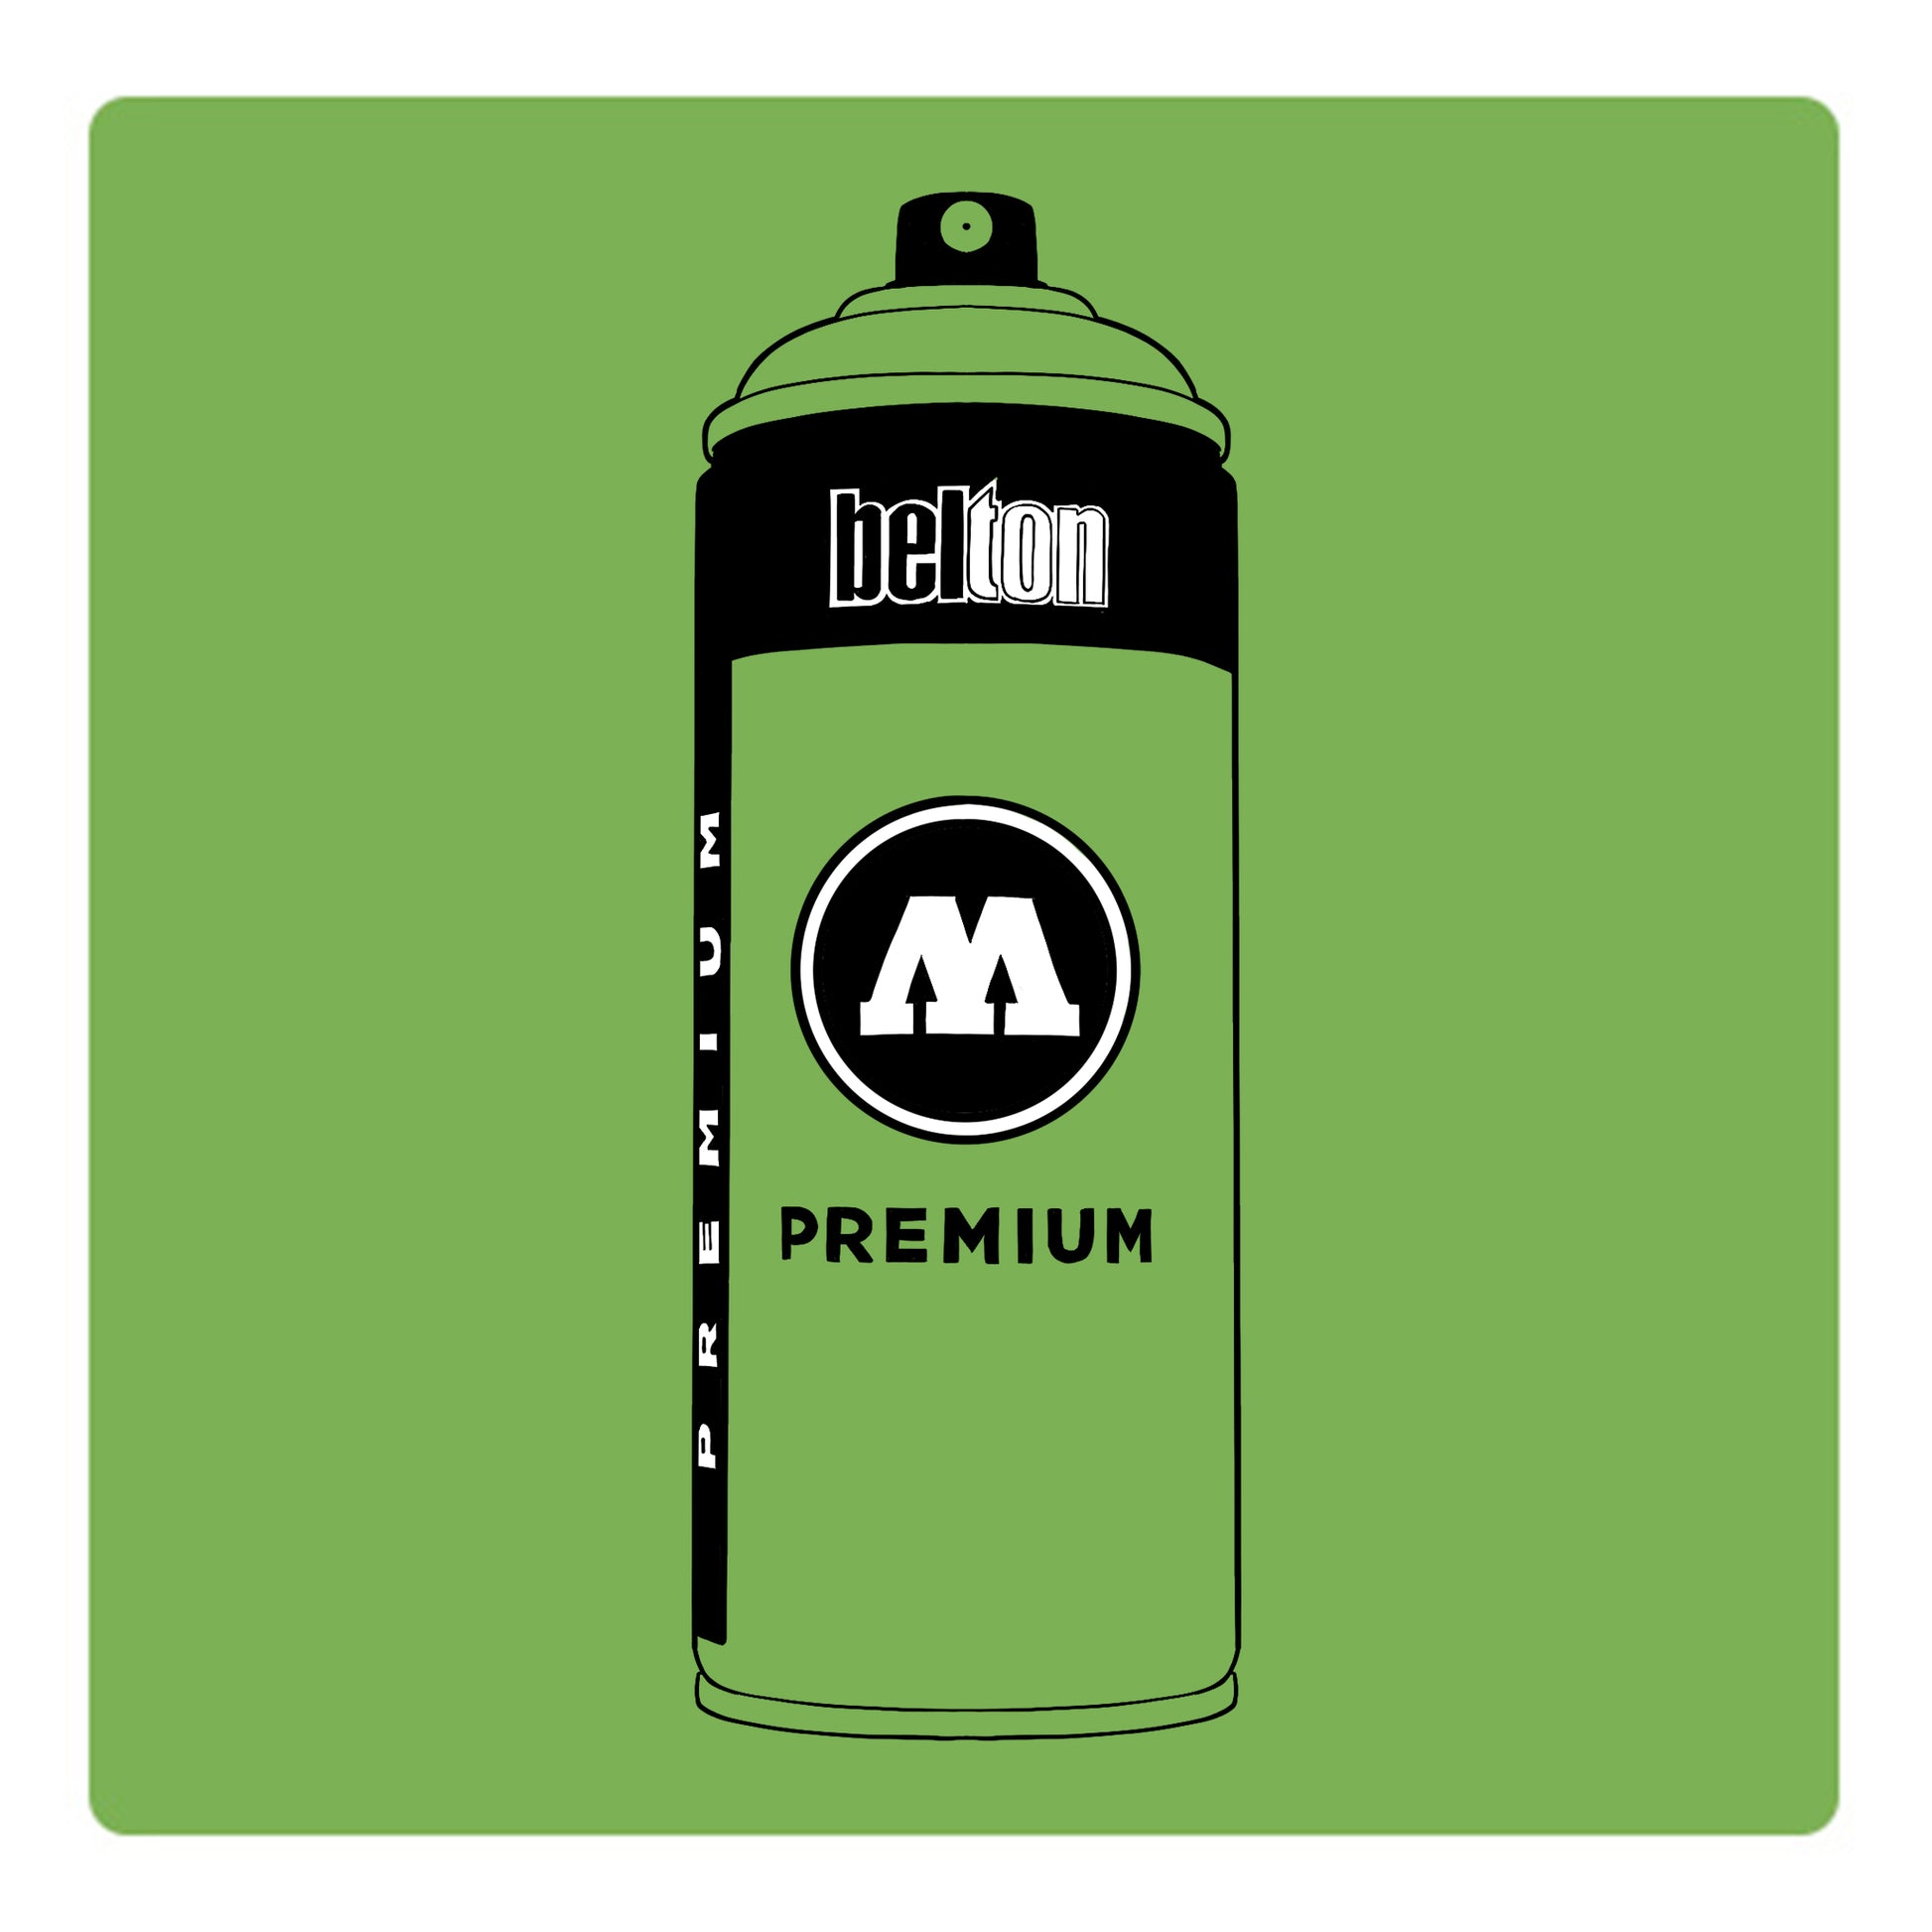 A black outline drawing of a apple green spray paint can with the words "belton","premium" and the letter"M" written on the face in black and white font. The background is a color swatch of the same apple green with a white border